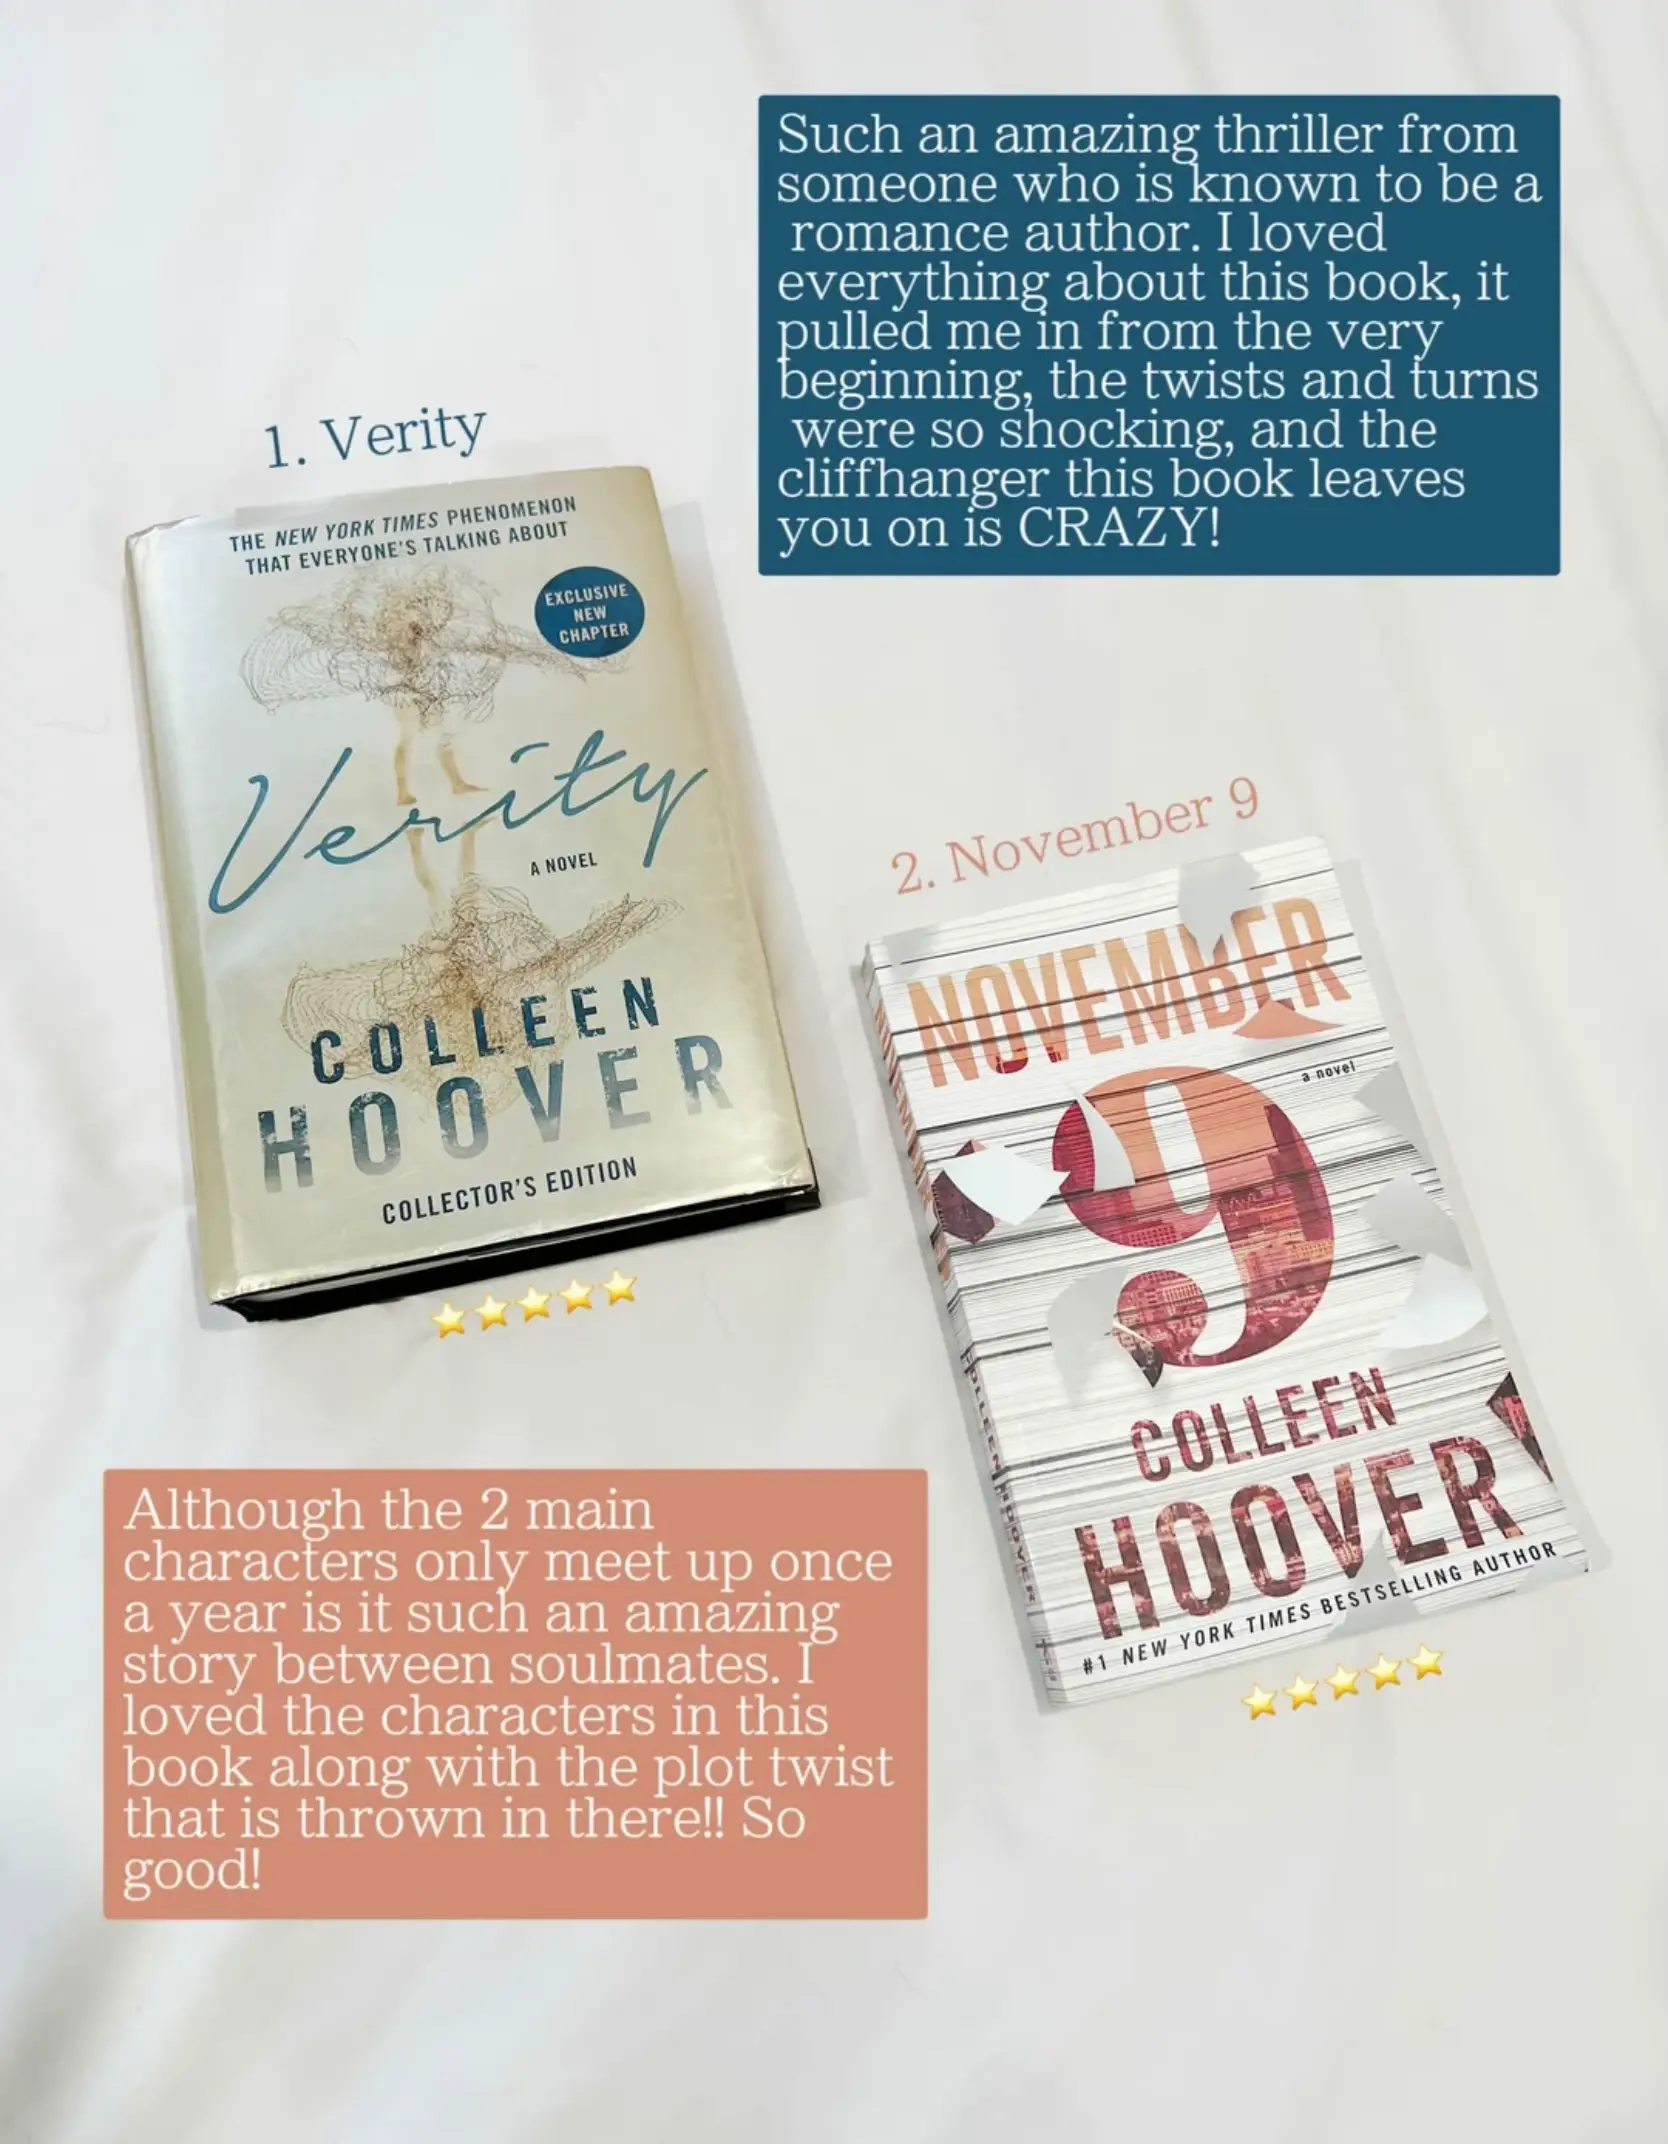 Verity by Colleen Hoover, a review » Quotation Re:Marks